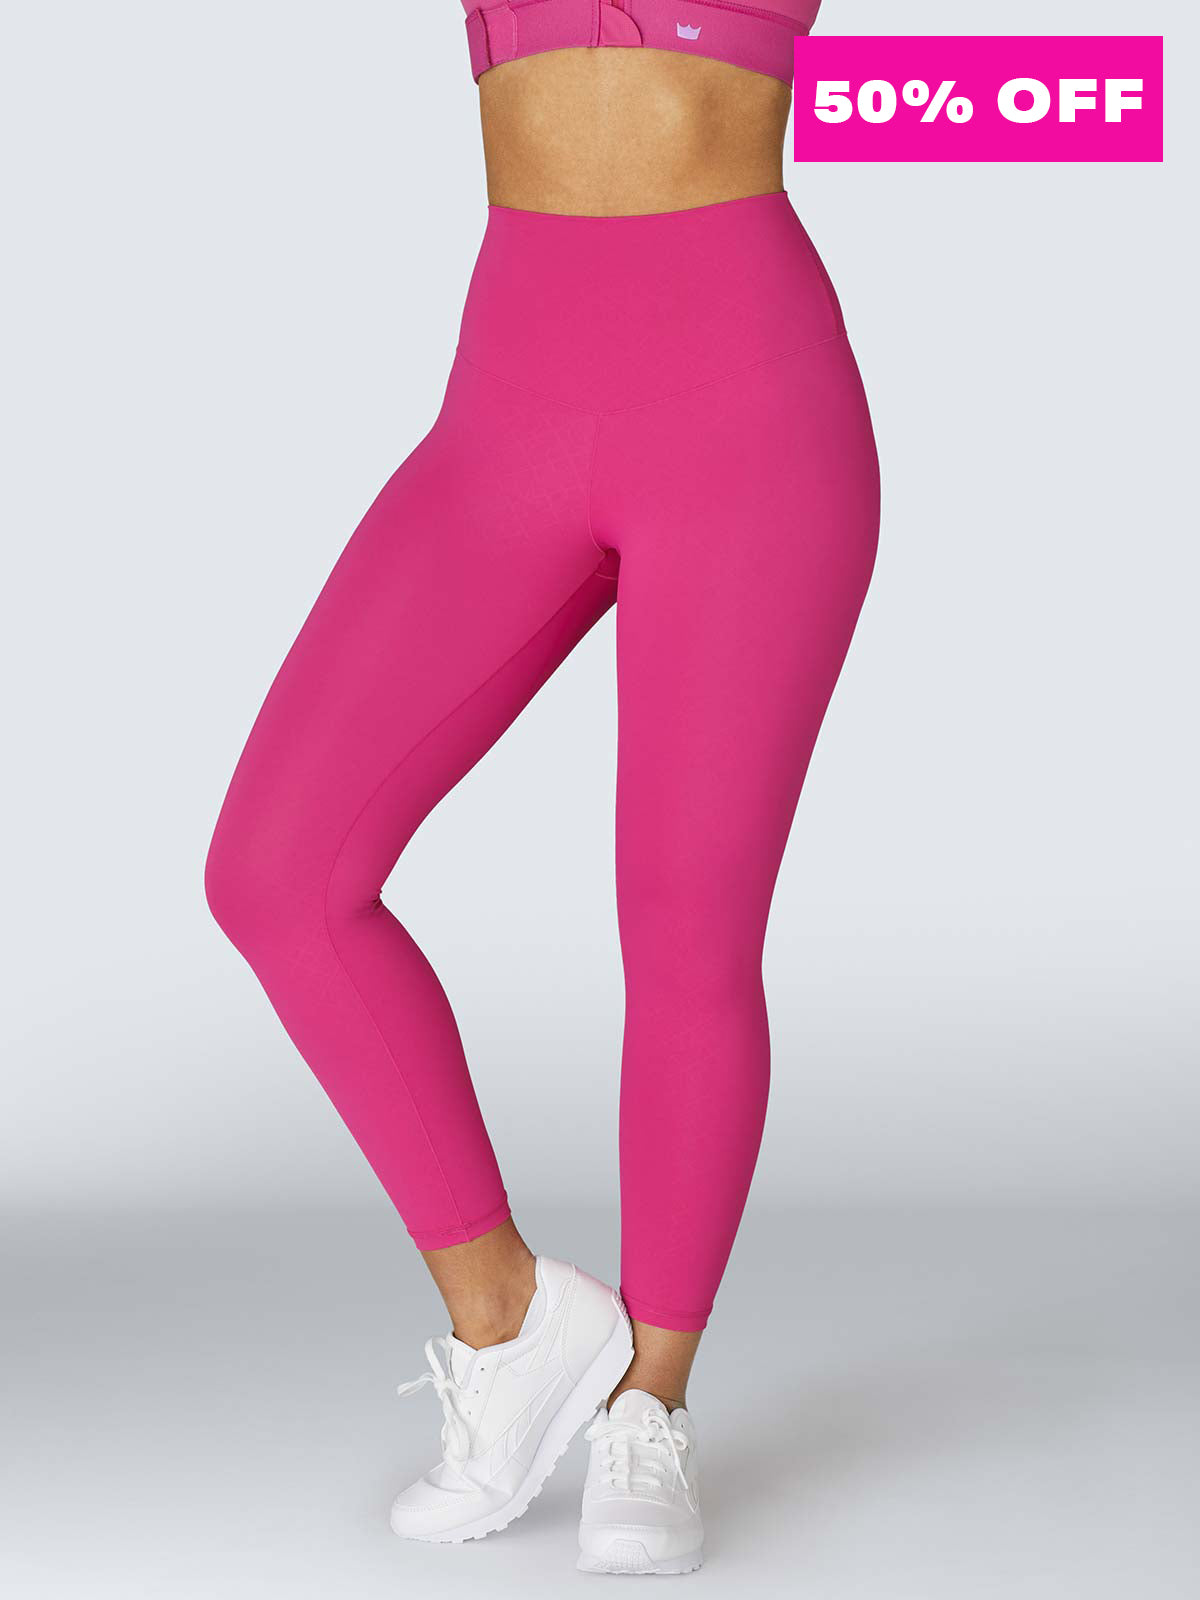 Get Fit Leggings - Berry  Cute workout outfits, Workout clothes